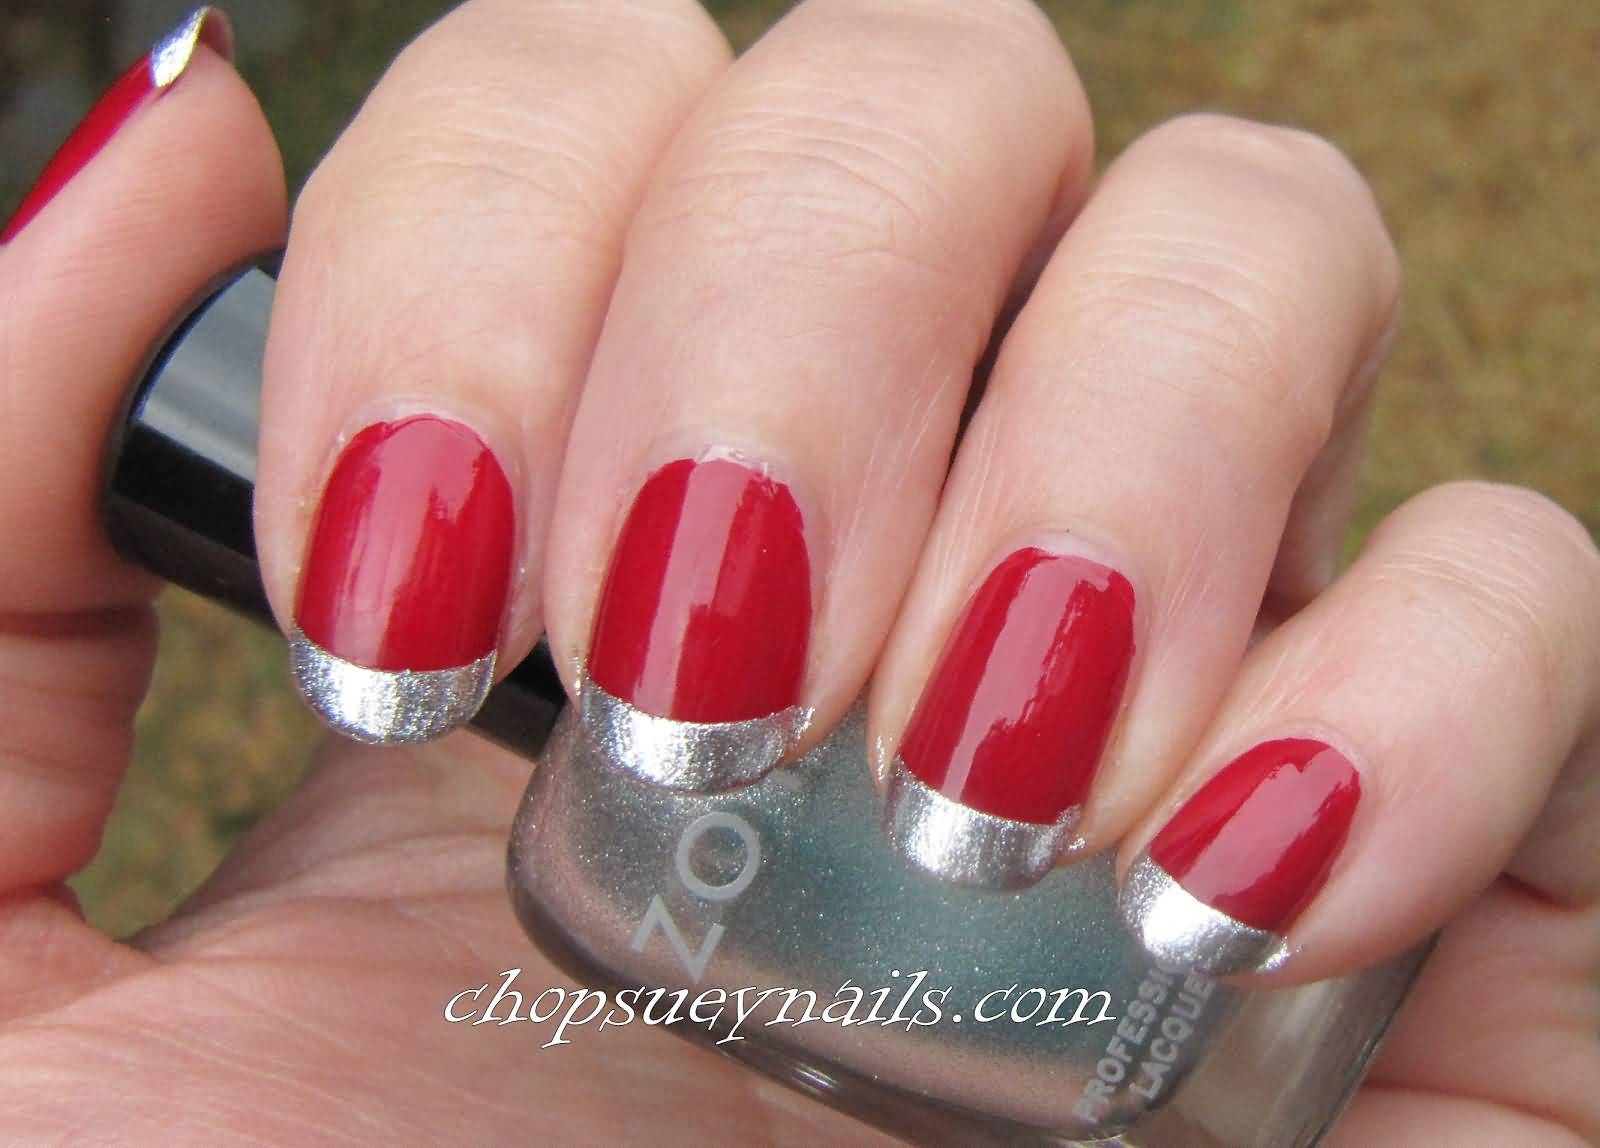 Red Glossy Nails With Silver Tip Nail Art